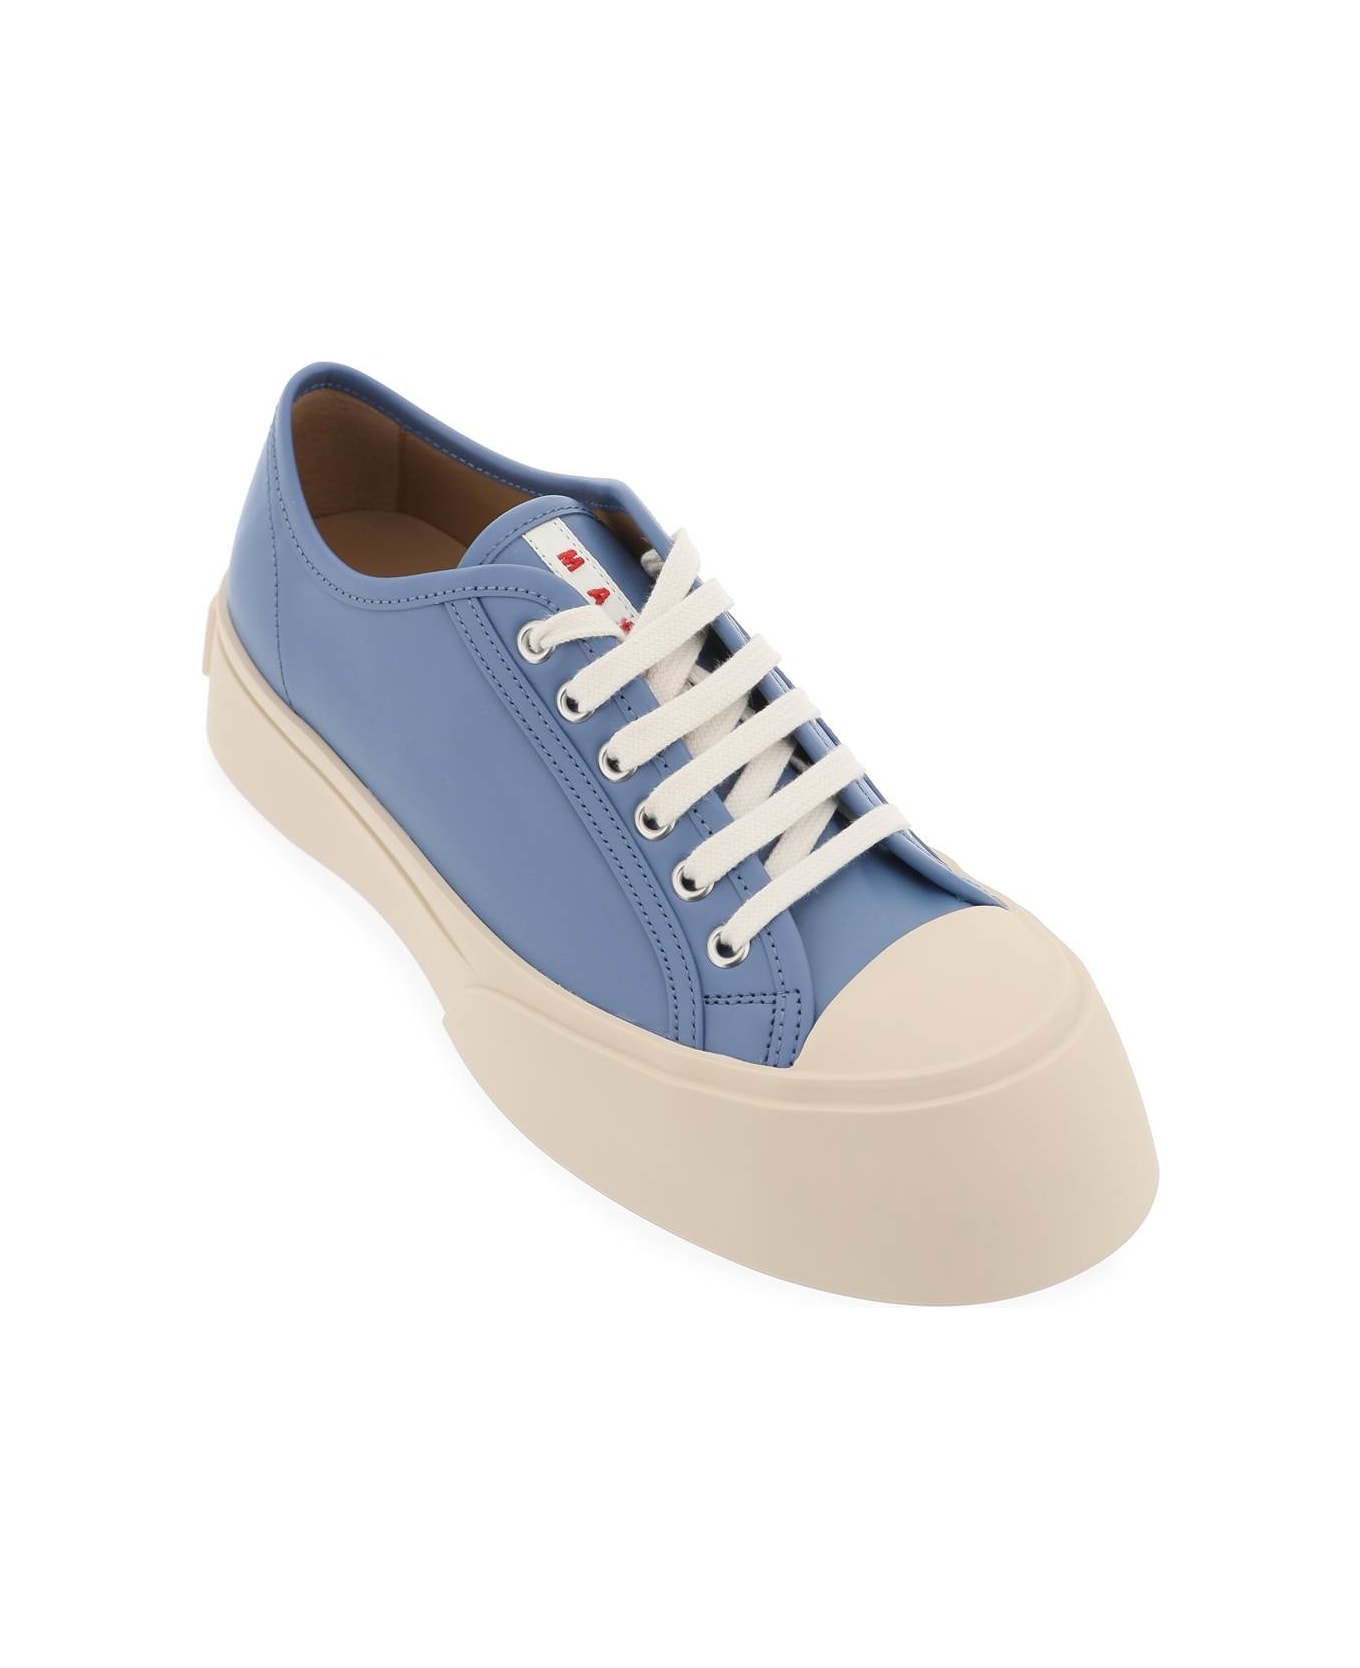 Marni Leather Pablo Sneakers - OPAL (Blue)